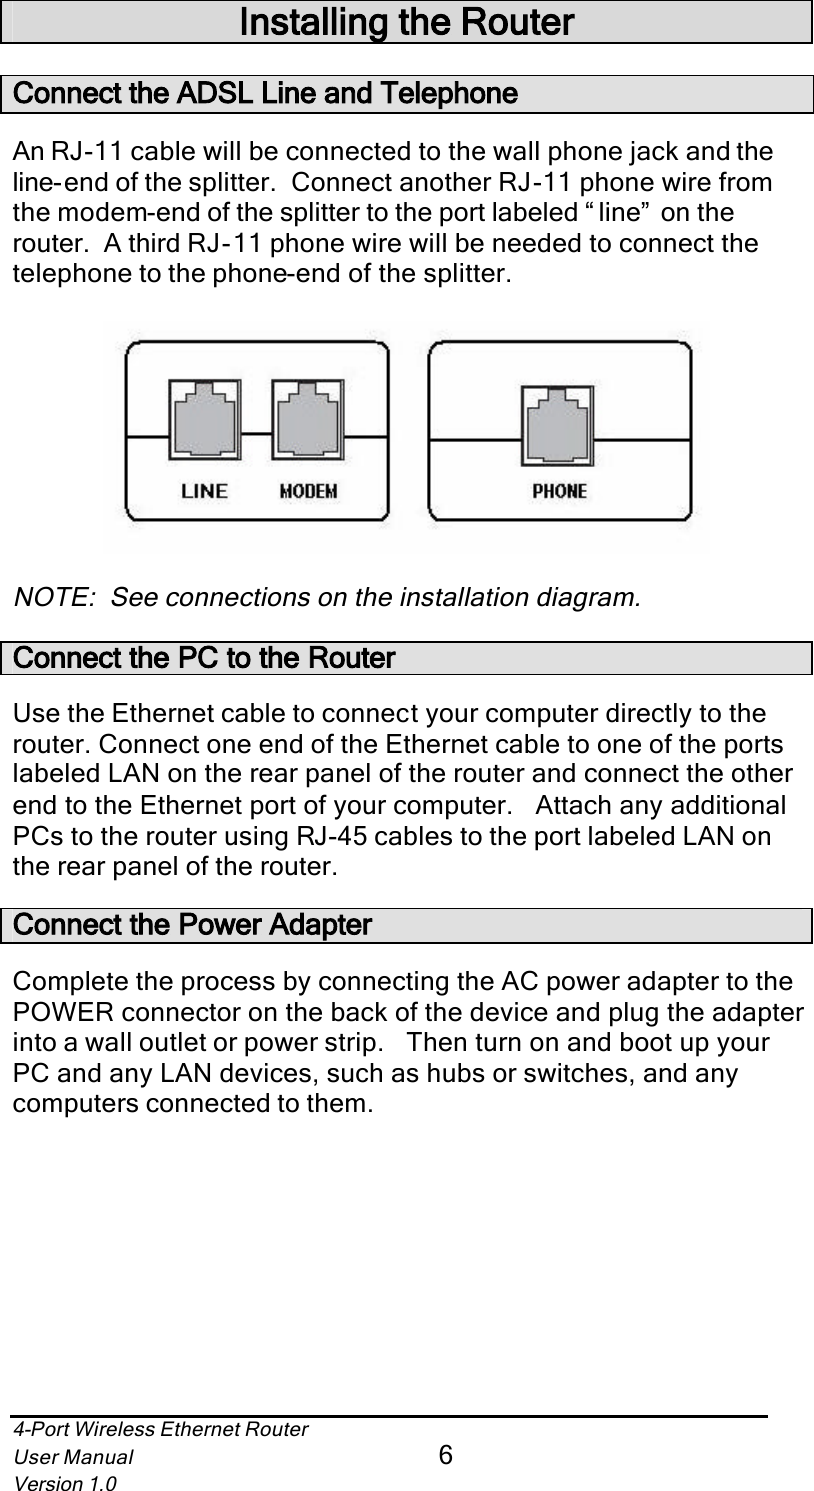 4-Port Wireless Ethernet RouterUser Manual6Version 1.0Installing the RouterConnect the ADSL Line and TelephoneAn RJ-11 cable will be connected to the wall phone jack and theline-end of the splitter.  Connect another RJ-11 phone wire from the modem-end of the splitter to the port labeled “ line”  on the router.  A third RJ-11 phone wire will be needed to connect the telephone to the phone-end of the splitter.NOTE:  See connections on the installation diagram.Connect the PC to the RouterUse the Ethernet cable to connect your computer directly to the router. Connect one end of the Ethernet cable to one of the ports labeled LAN on the rear panel of the router and connect the other end to the Ethernet port of your computer.   Attach any additional PCs to the router using RJ-45 cables to the port labeled LAN on the rear panel of the router.Connect the Power AdapterComplete the process by connecting the AC power adapter to the POWER connector on the back of the device and plug the adapter into a wall outlet or power strip.   Then turn on and boot up your PC and any LAN devices, such as hubs or switches, and any computers connected to them. 